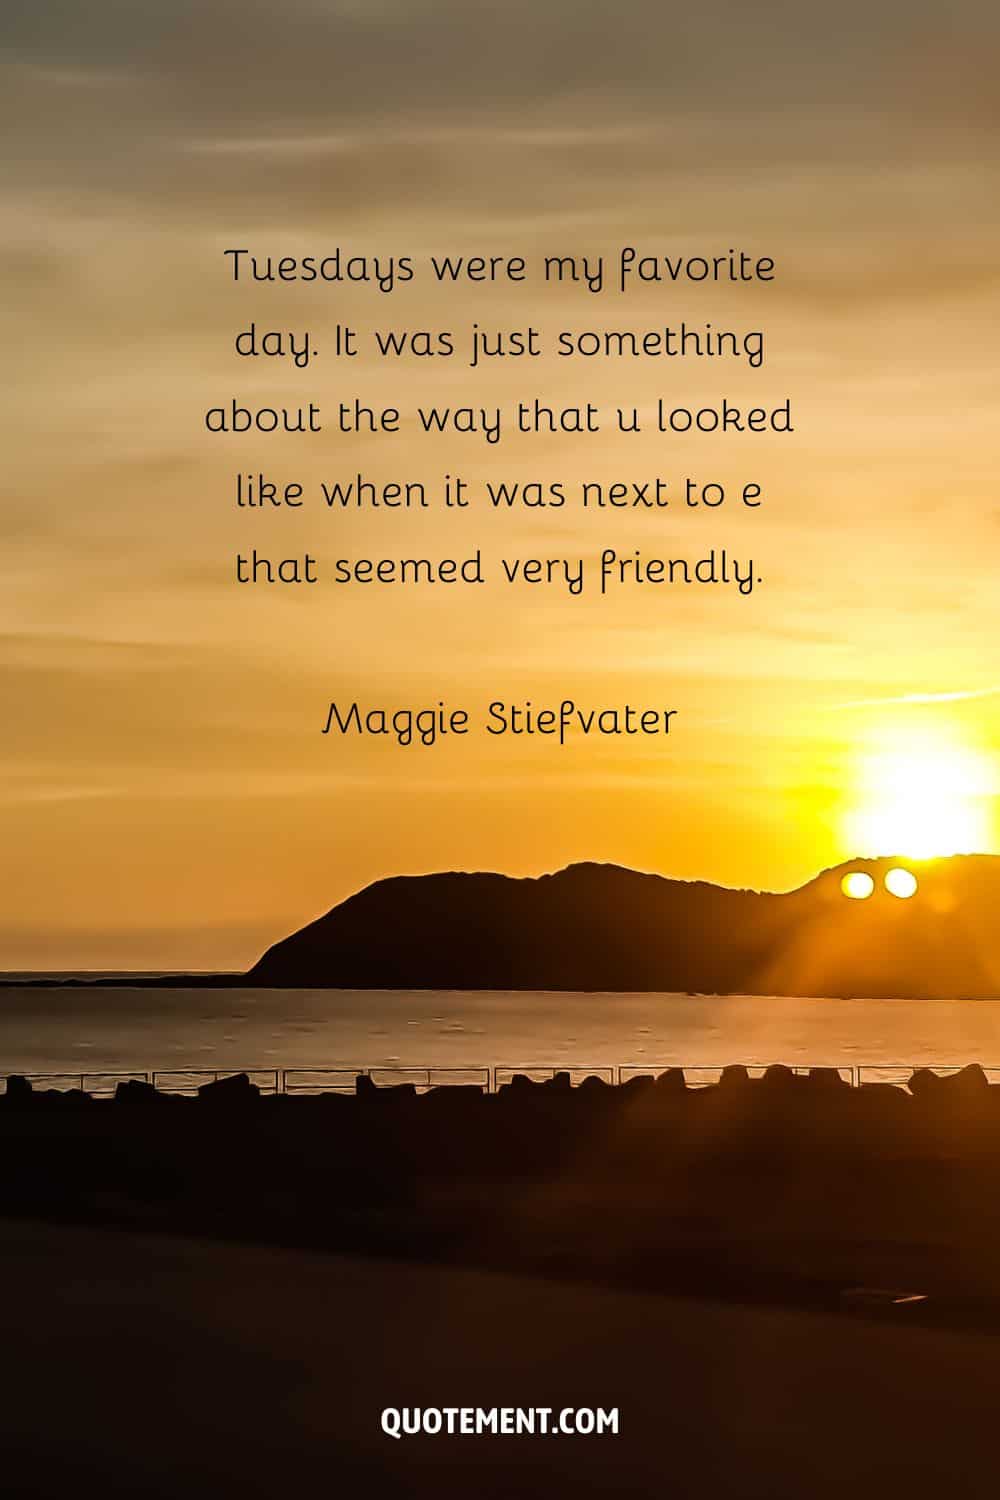 “Tuesdays were my favorite day. It was just something about the way that u looked like when it was next to e that seemed very friendly.” — Maggie Stiefvater